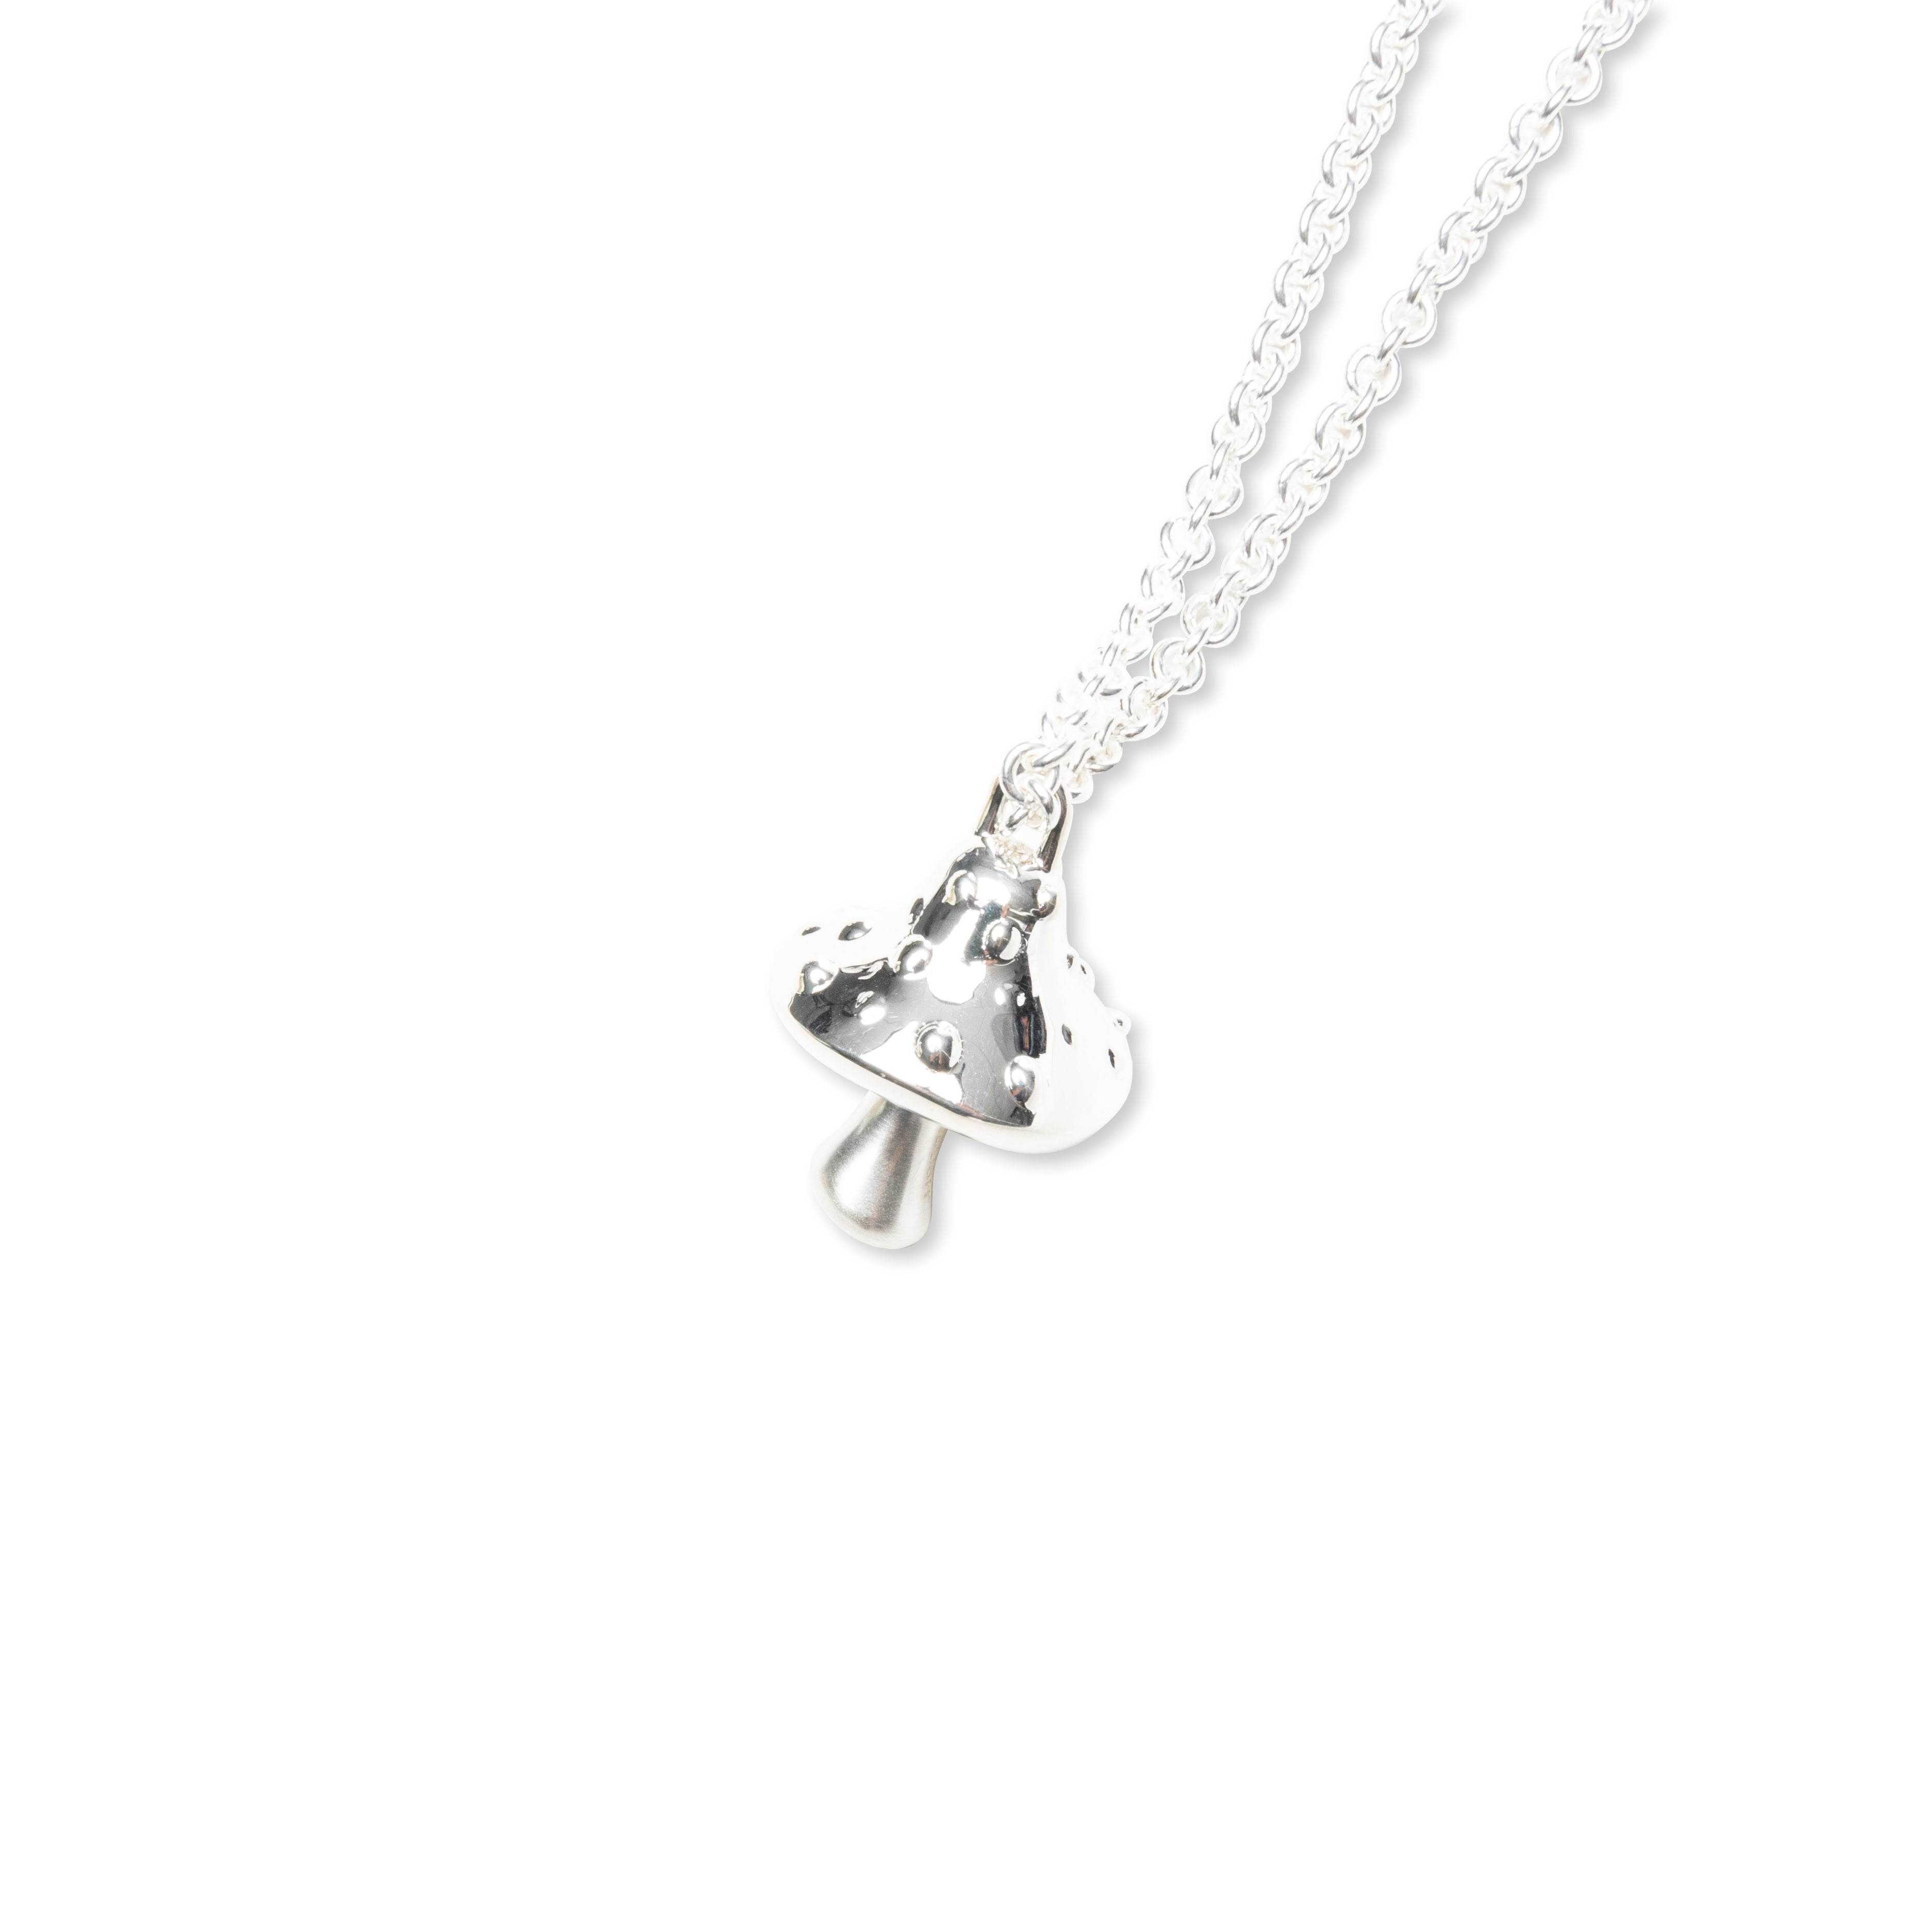 Mushroom Charm Necklace - Silver, , large image number null